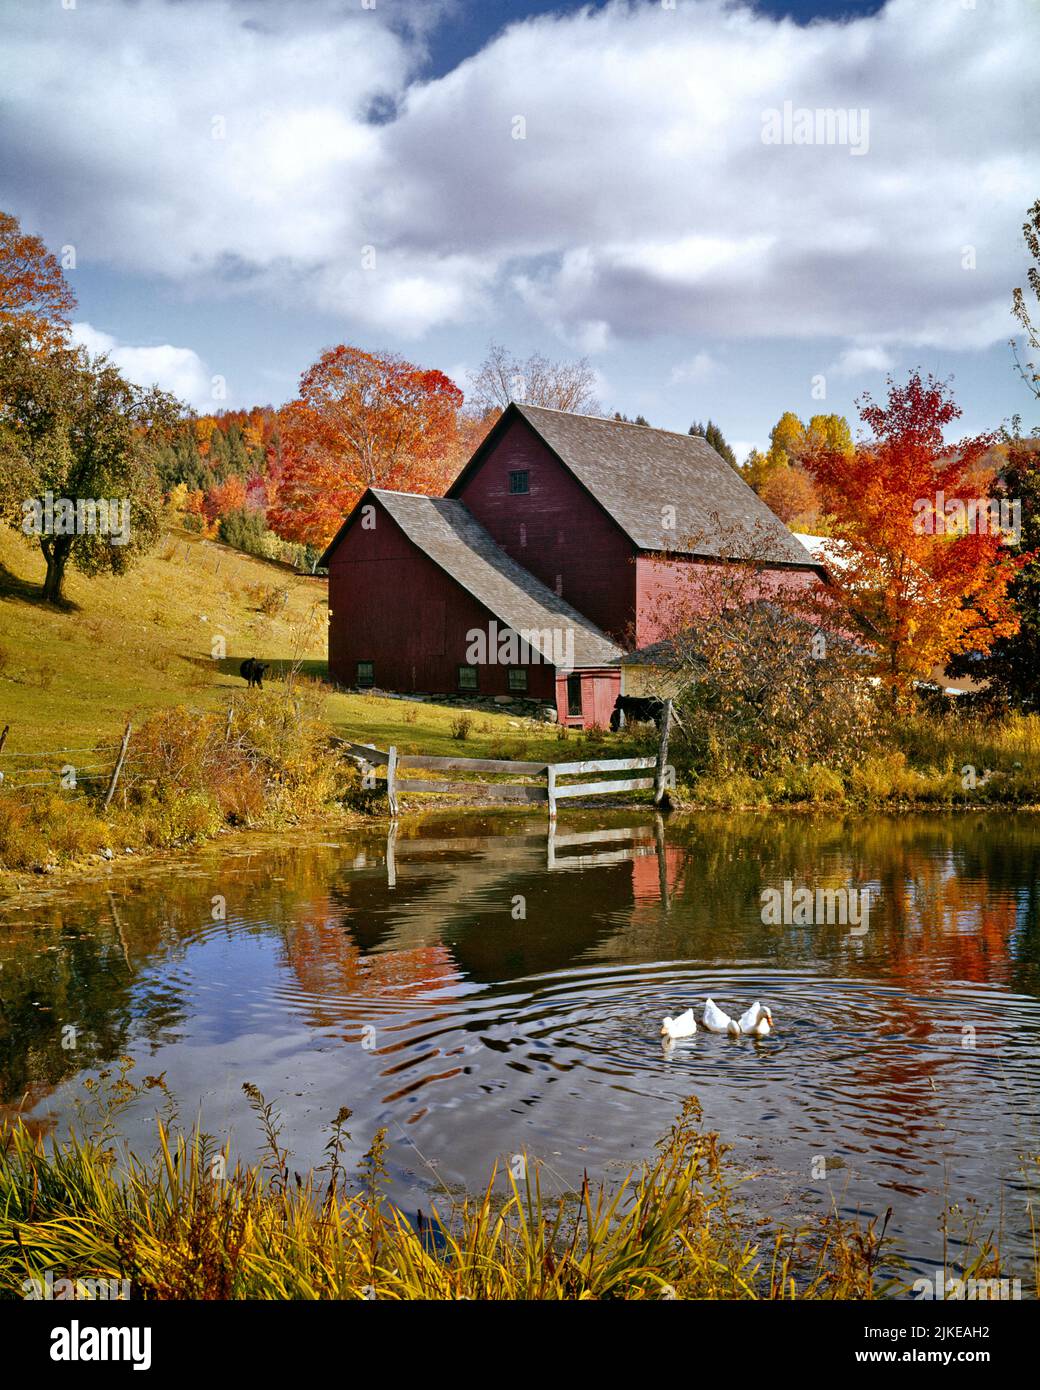 1960s RURAL AUTUMN SCENE WITH RED BARN BLACK ANGUS COWS AND FARM POND WITH FOUR SWIMMING FEEDING WHITE DUCKS - kl2155 HAR001 HARS AND EXTERIOR FLOCK COWS FALL SEASON PEACEFUL REAL ESTATE STRUCTURES EDIFICE PASTORAL BUCOLIC SEVERAL ANGUS AUTUMNAL BARNS FALL FOLIAGE HAR001 OLD FASHIONED Stock Photo